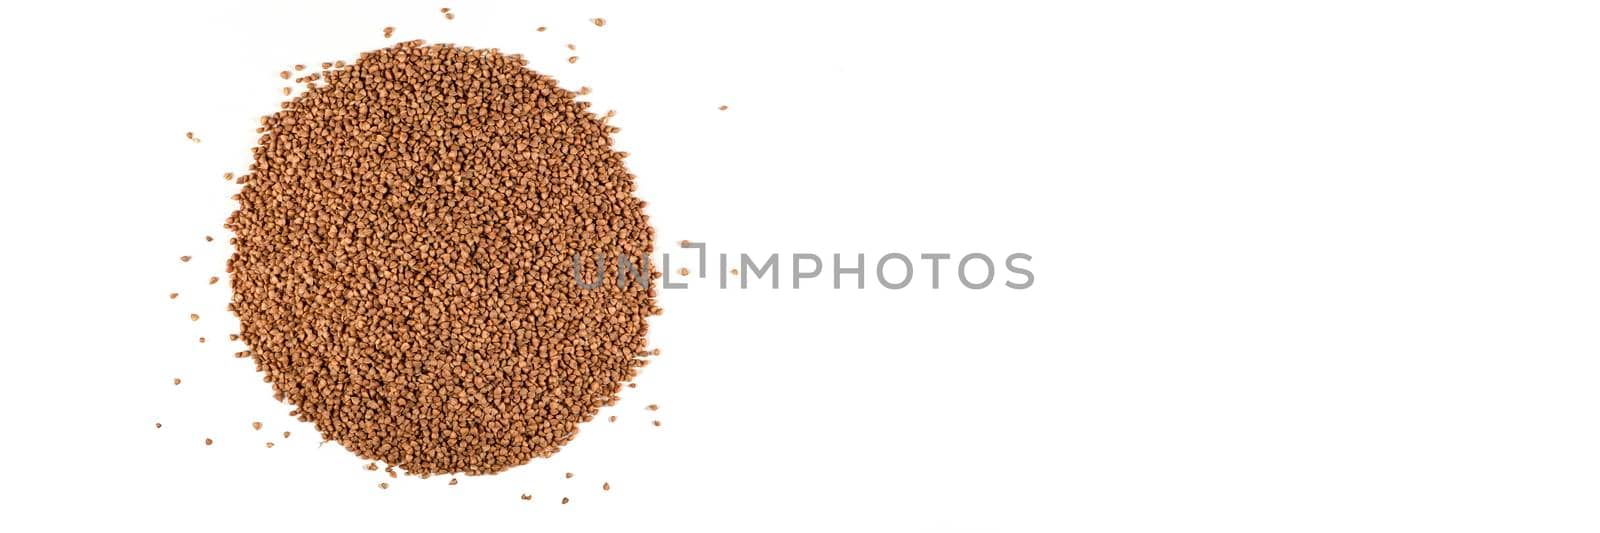 Texture of buckwheat. Background for dry buckwheat design. Large size for banner printing or packaging. Top view of evenly scattered buckwheat groats. by SERSOL